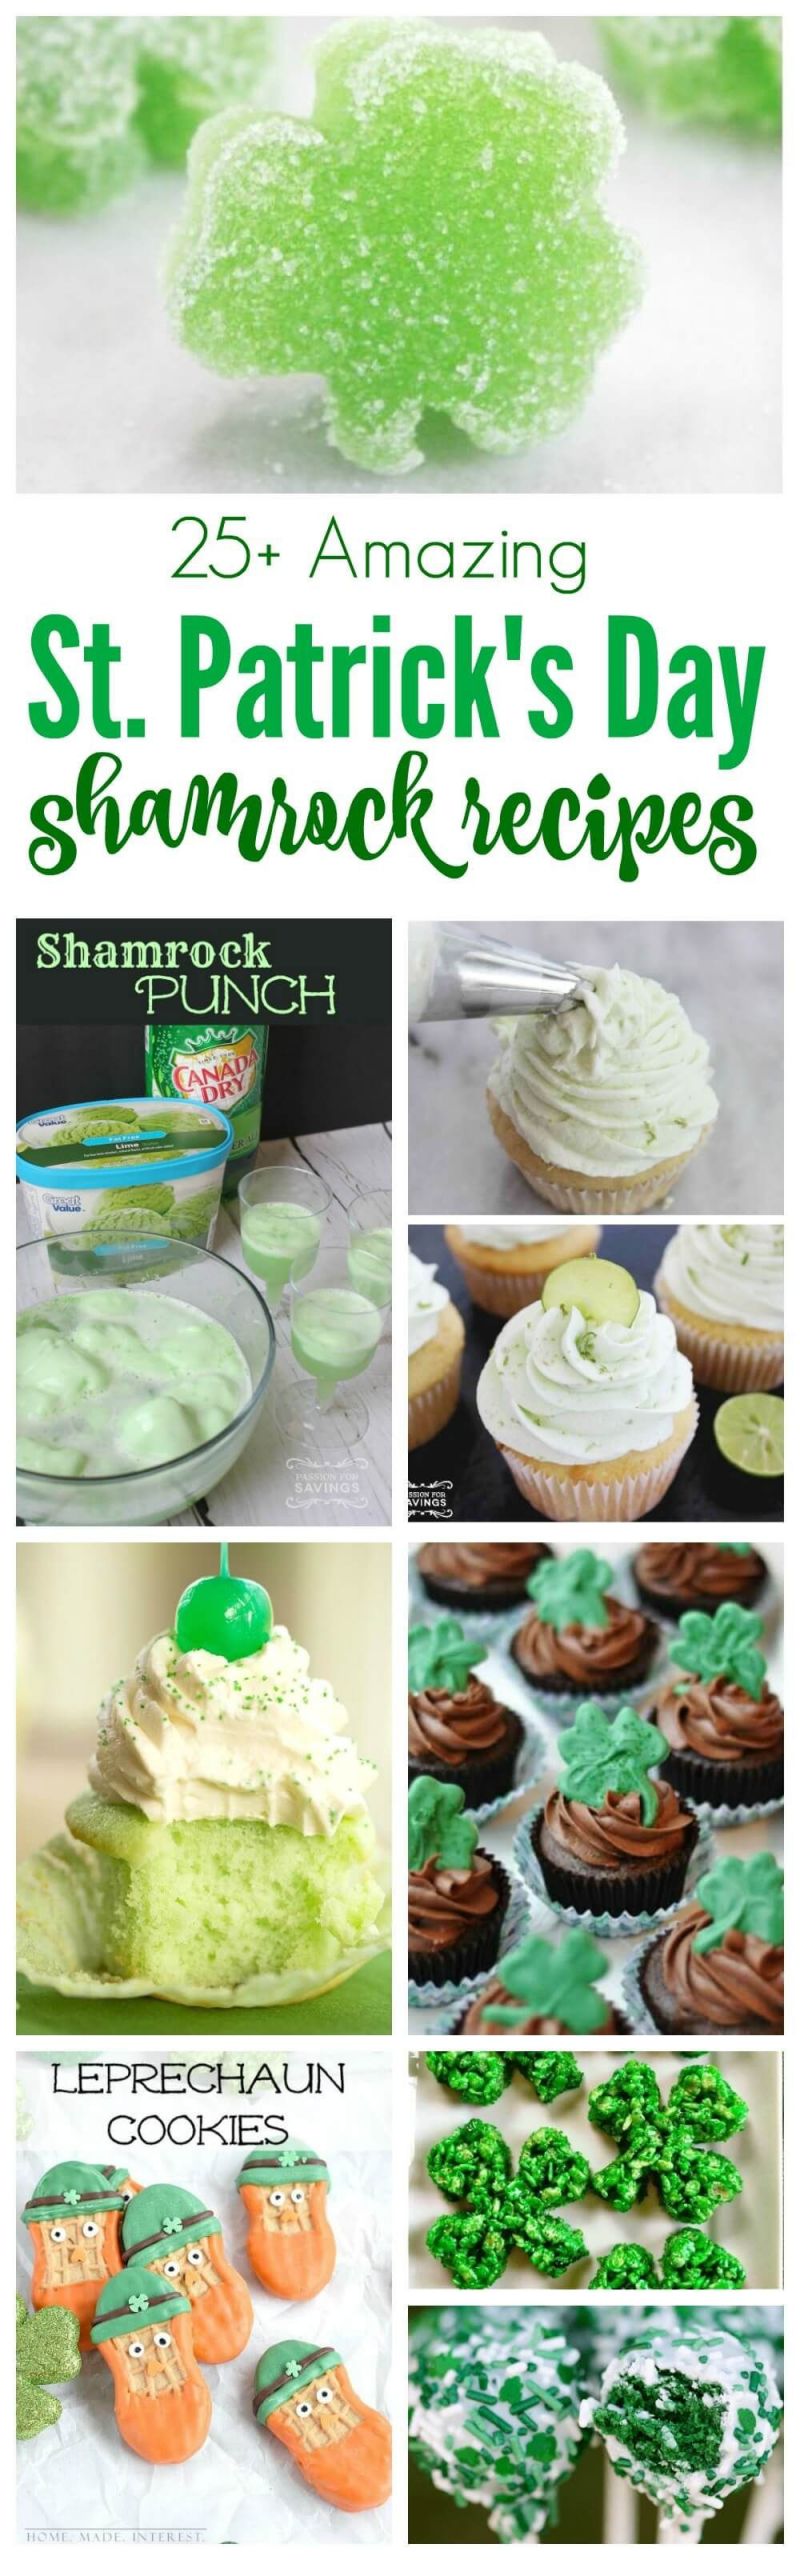 St Patrick's Day Traditions Food
 St Patricks Day Shamrock Recipes to help you celebrate